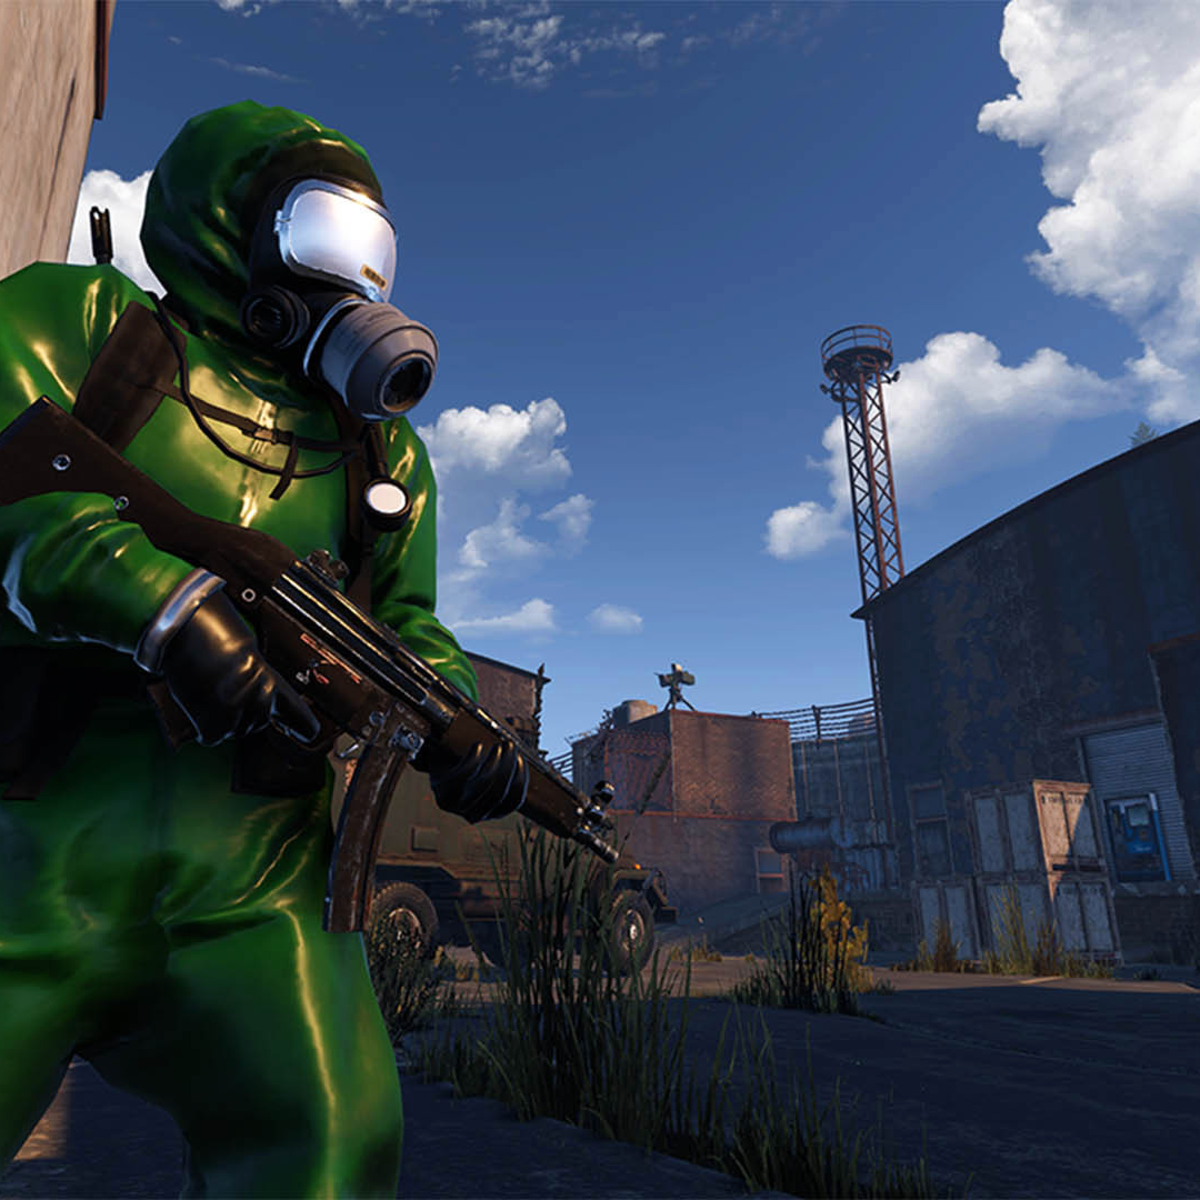 After Eight Years Of Development, Rust Has Sold 12 Million Copies | Vg247